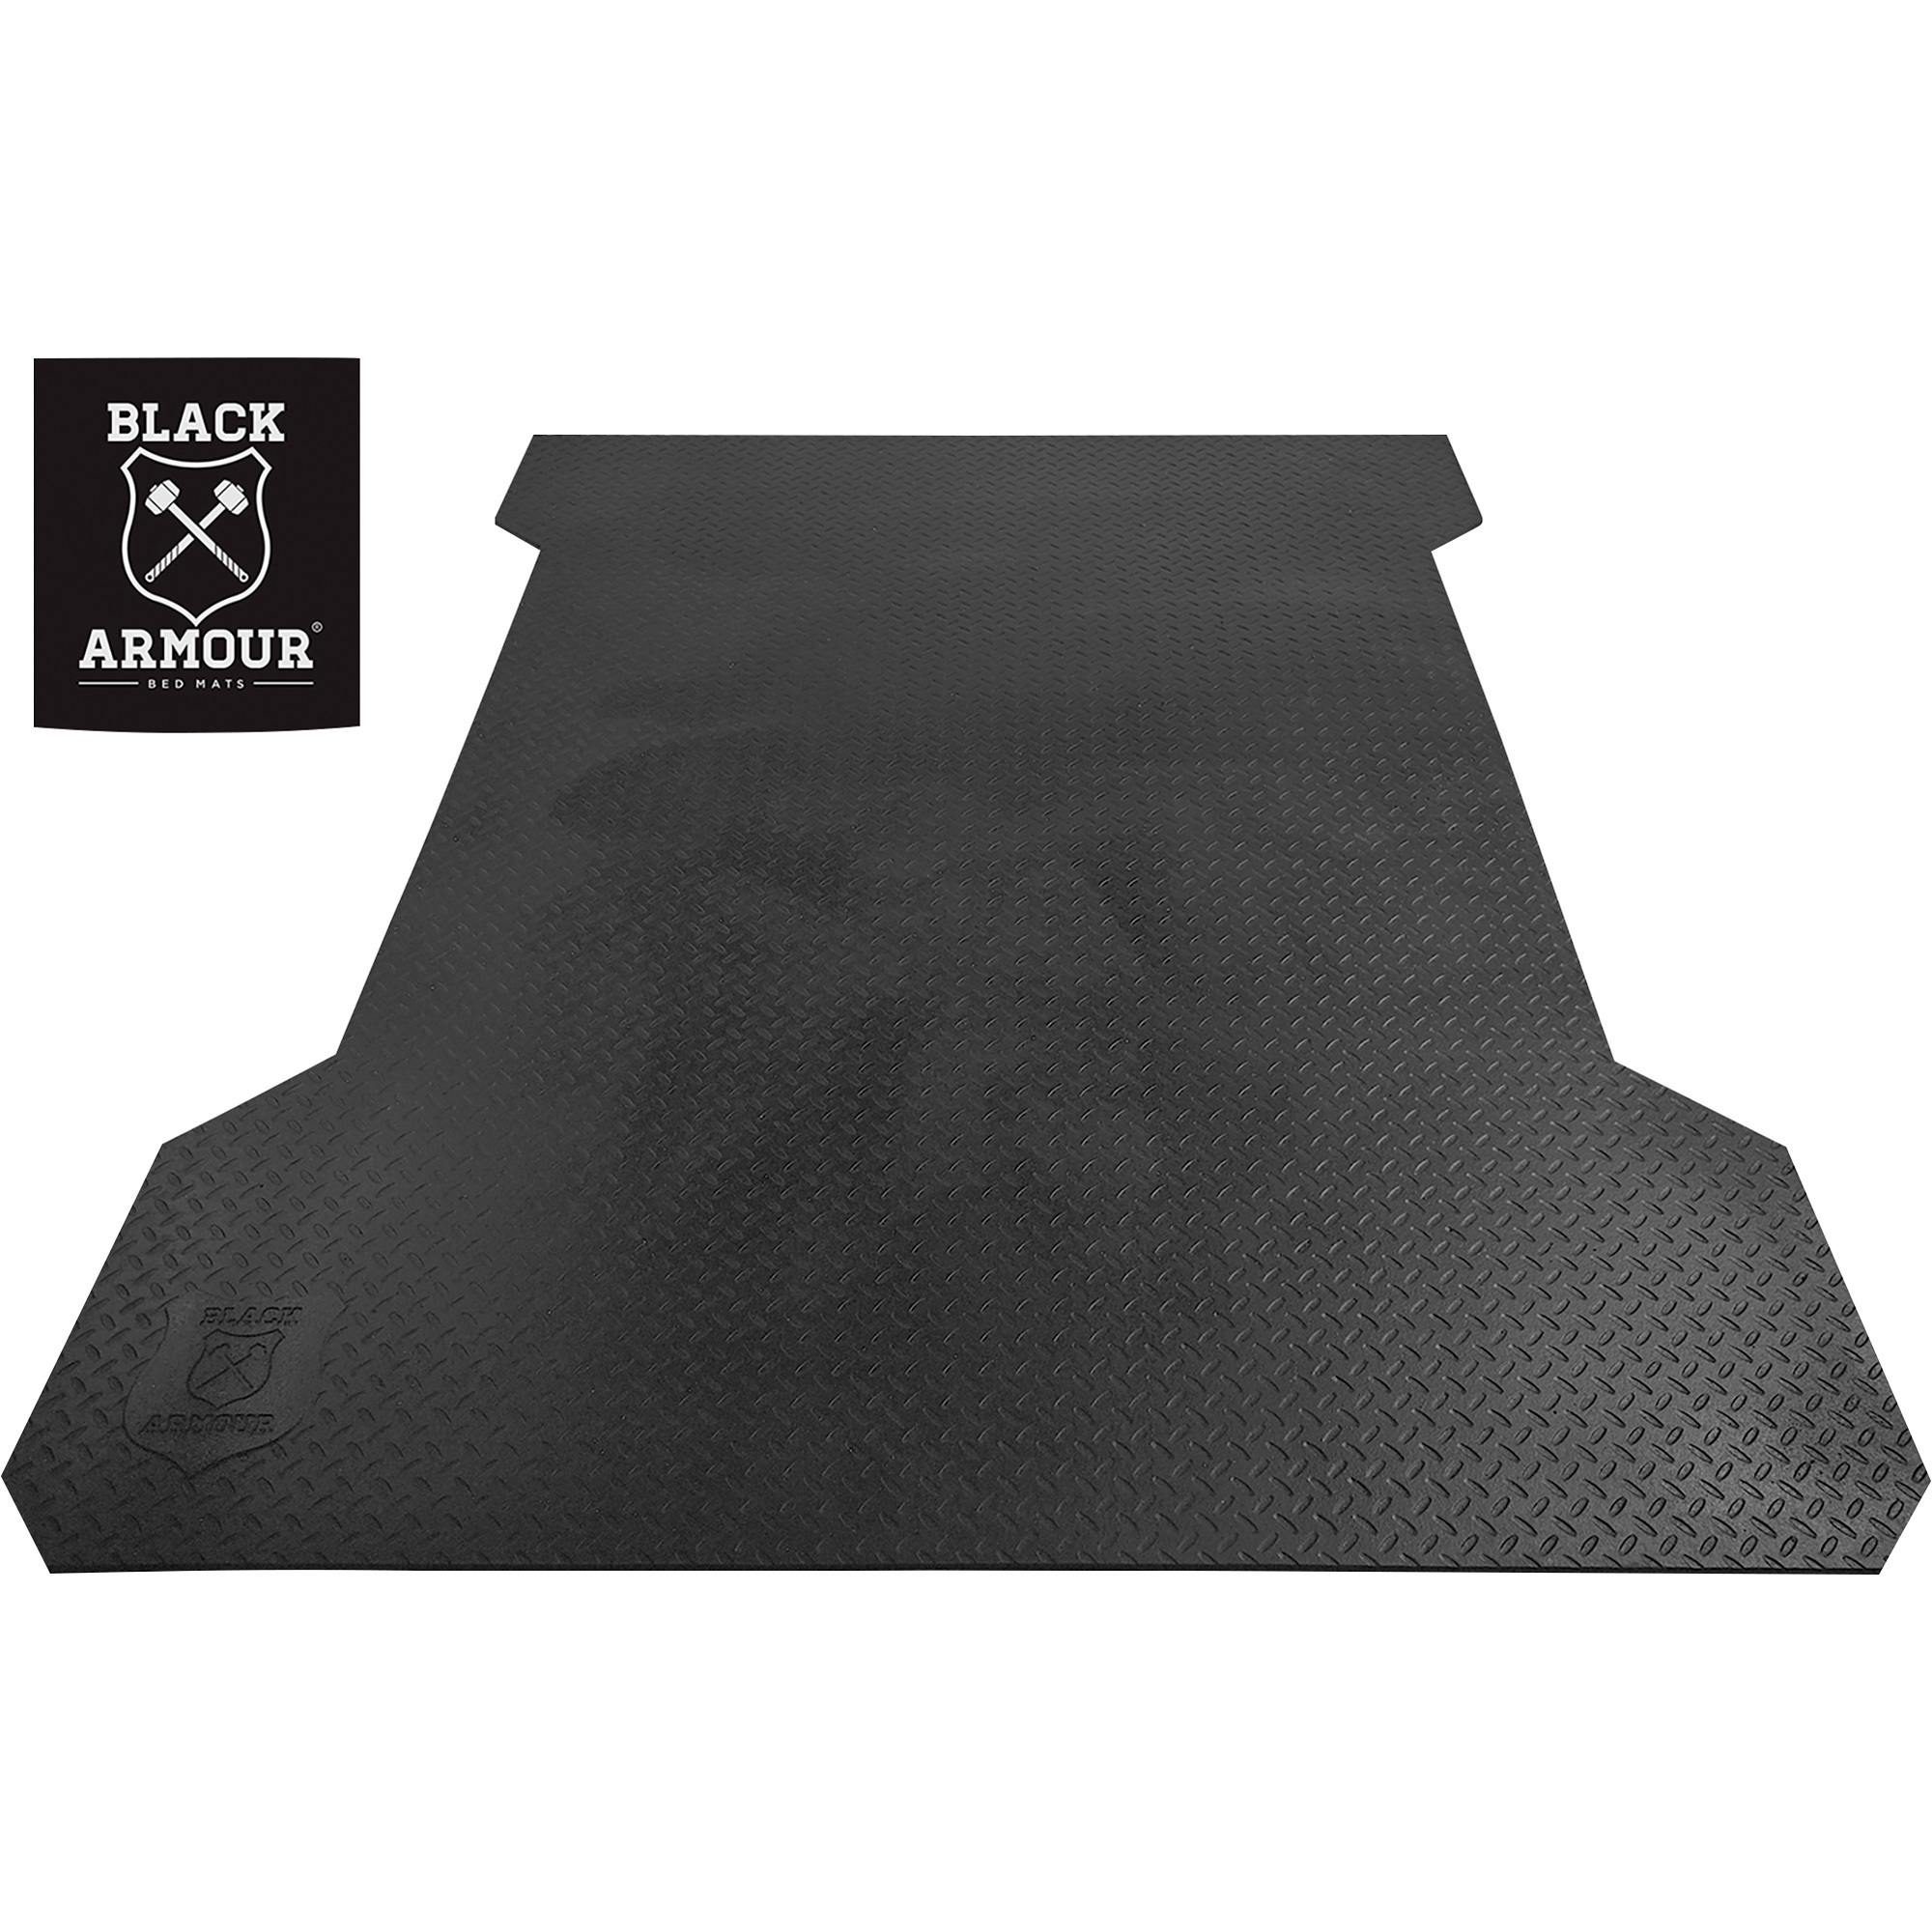 Black Armour Contoured Truck Bed Mat — 75.01in.L x 59.62in.W x 1/2in. Thick, Checker-Plate, Black, Model# 1305758 | Northern